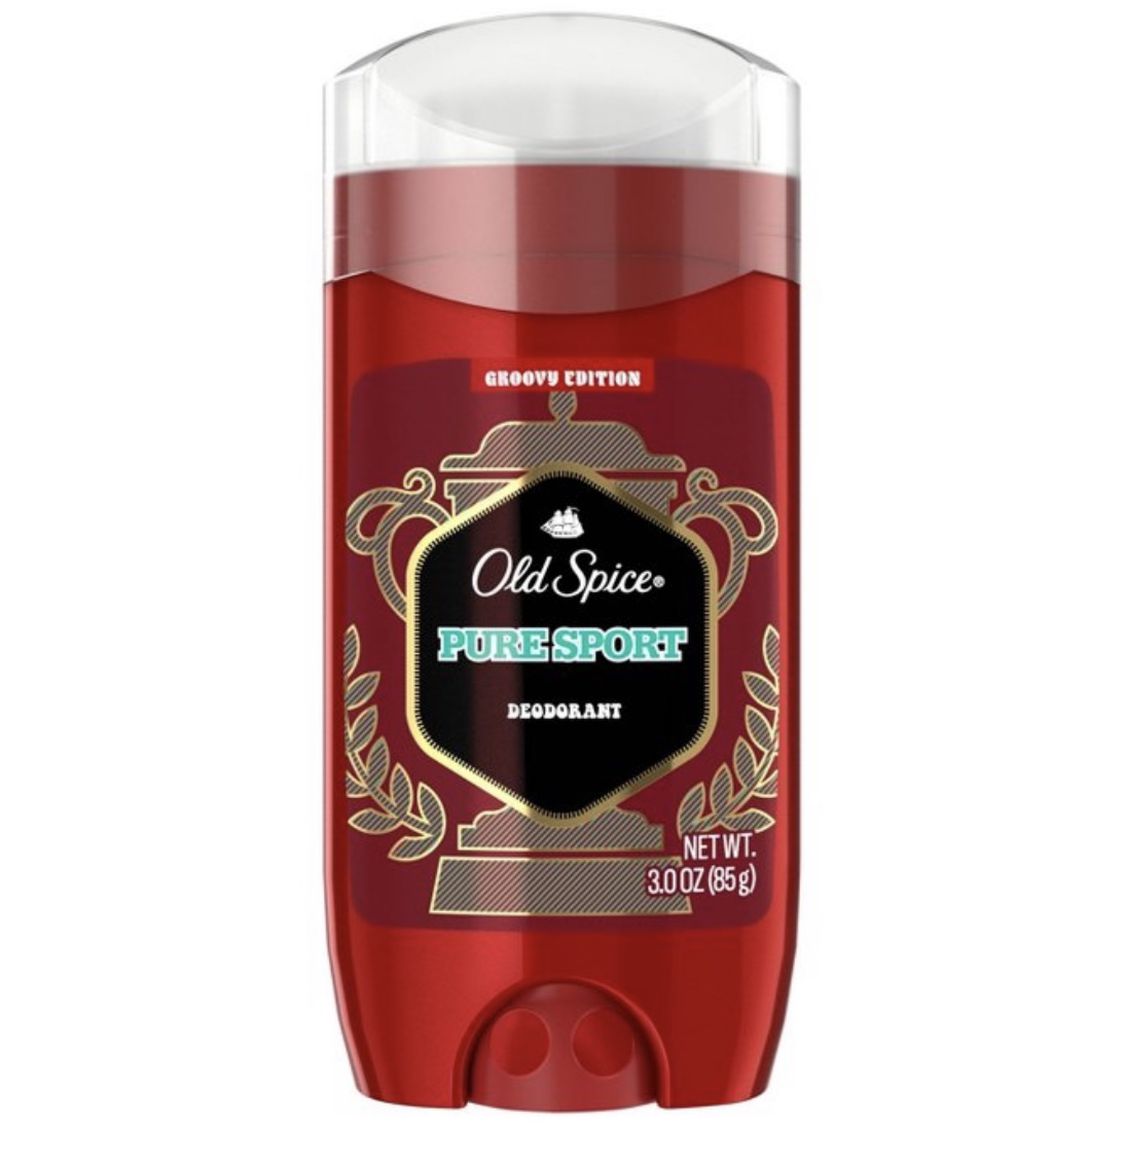 Old Spice Pure Sport 3oz